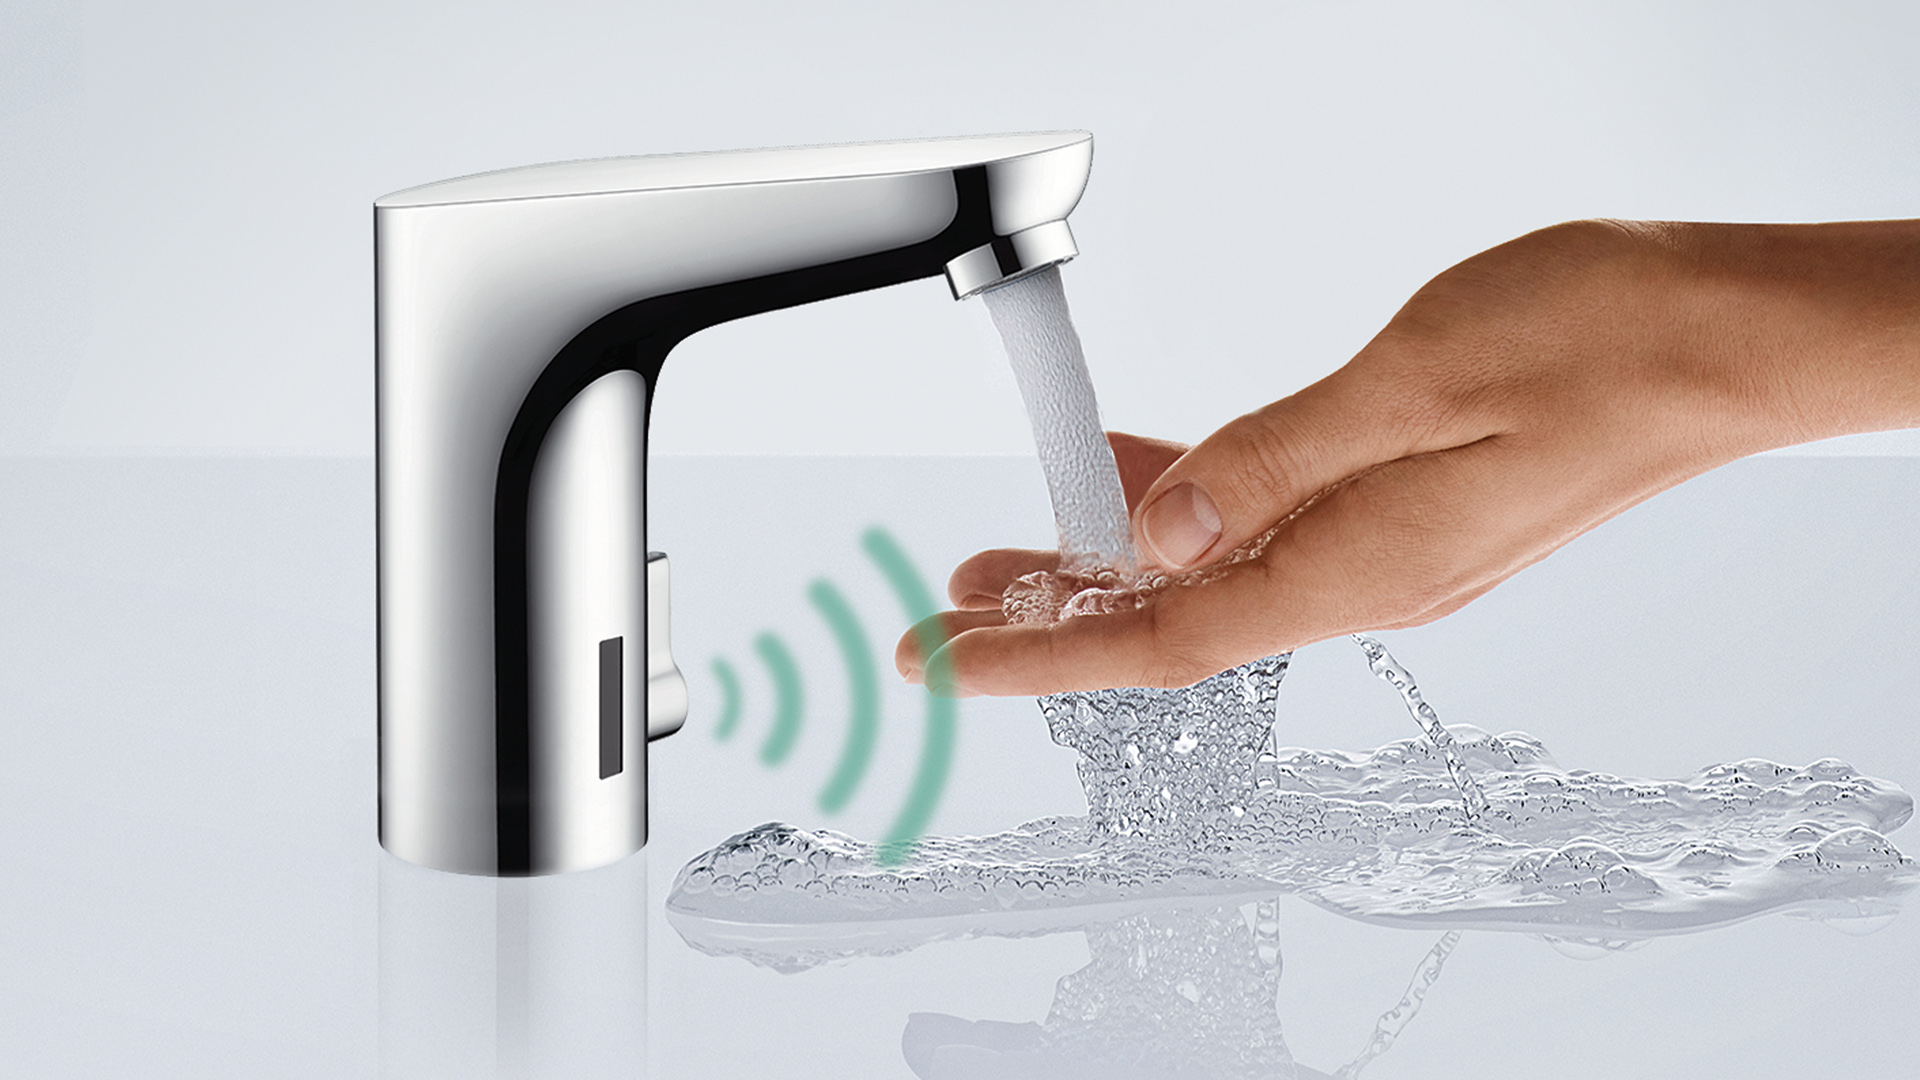 Sensor Activation: Starts the electronic tap